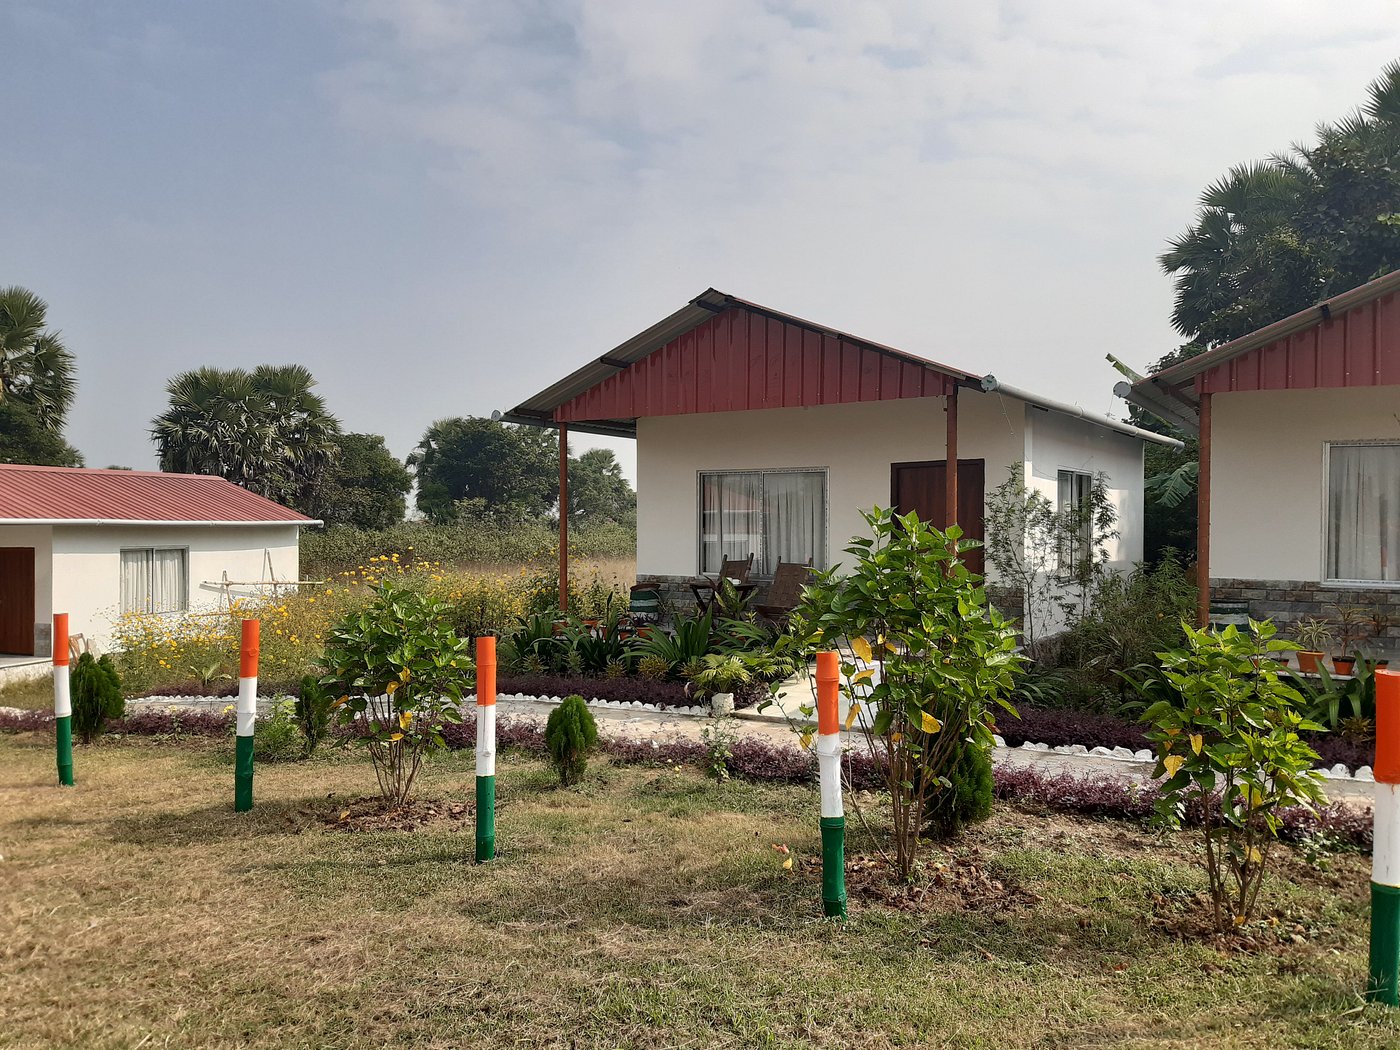 west bengal tourism guest house in purulia